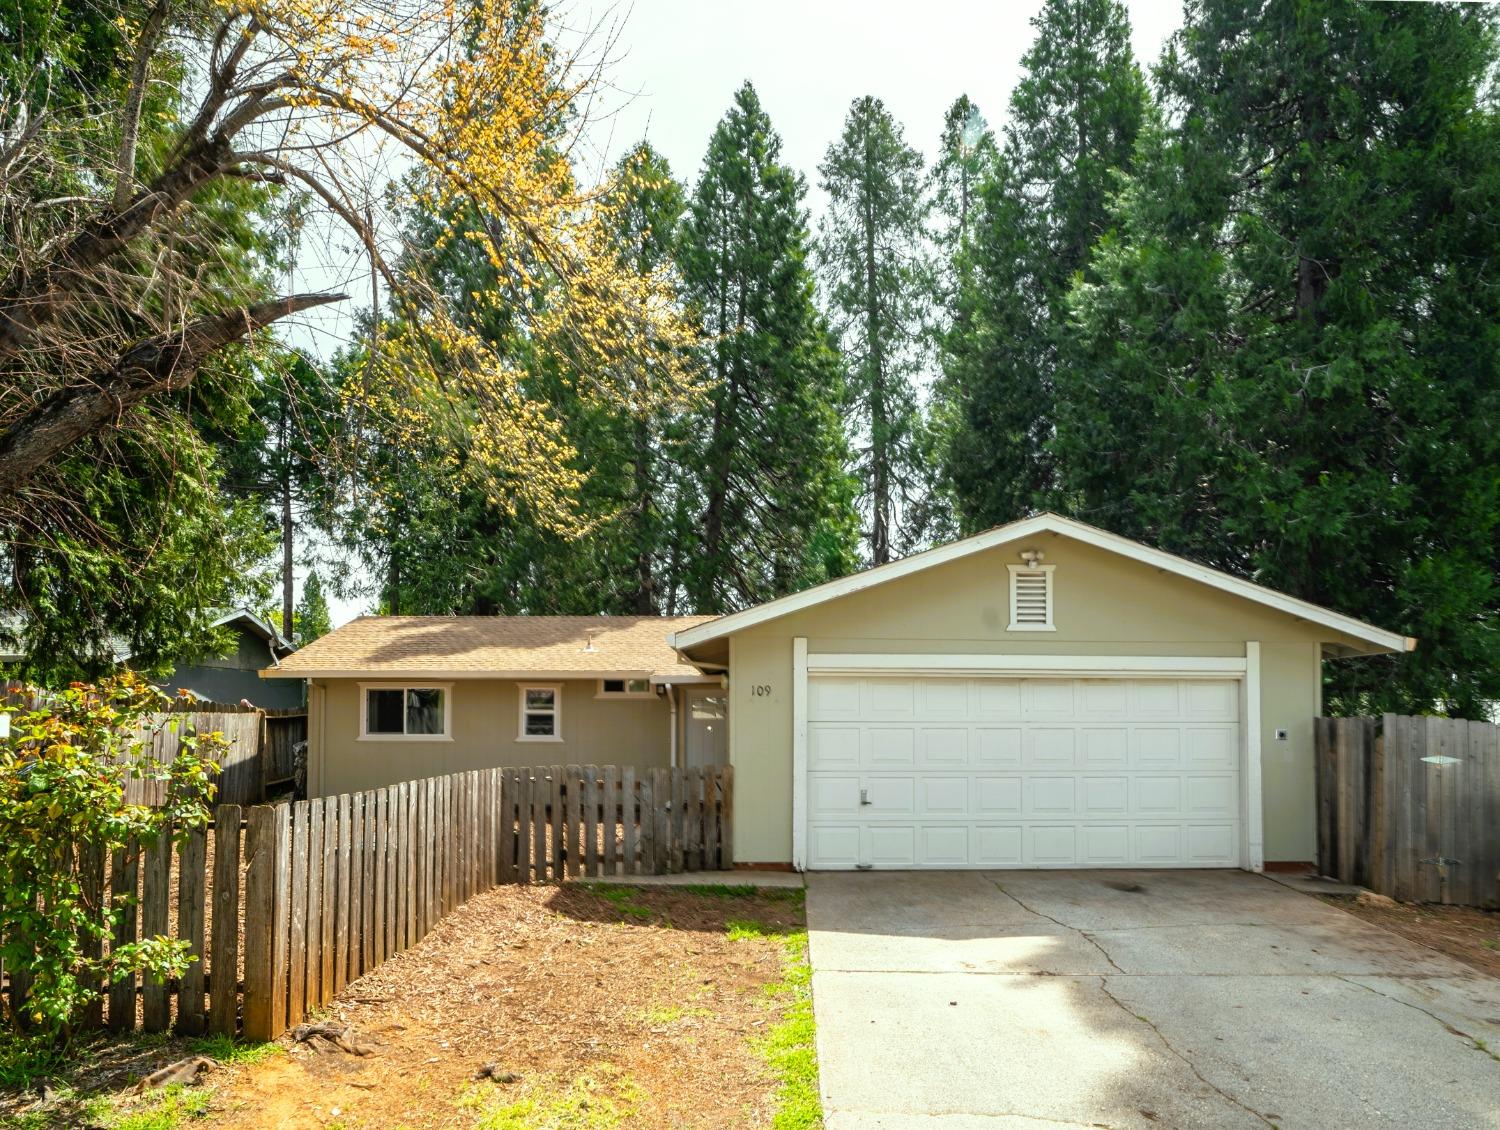 Photo of 109 King Ct in Grass Valley, CA